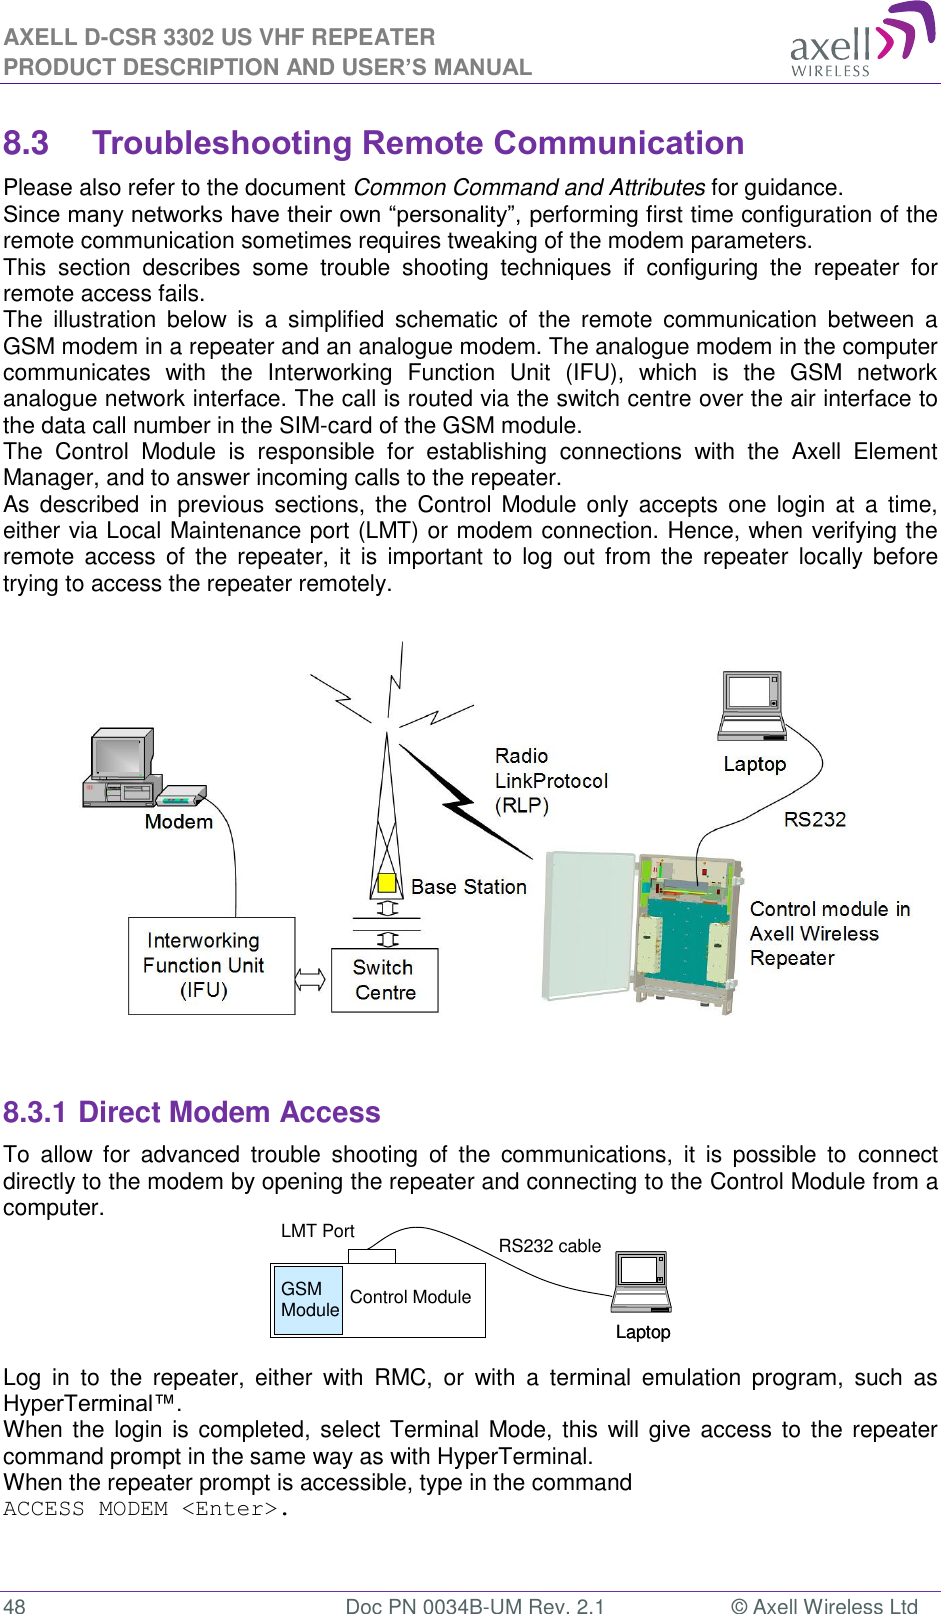 AXELL D-CSR 3302 US VHF REPEATER PRODUCT DESCRIPTION AND USER’S MANUAL  48  Doc PN 0034B-UM Rev. 2.1  © Axell Wireless Ltd LaptopLaptopRS232 cableControl ModuleGSM ModuleLMT Port8.3 Troubleshooting Remote Communication Please also refer to the document Common Command and Attributes for guidance.  Since many networks have their own “personality”, performing first time configuration of the remote communication sometimes requires tweaking of the modem parameters. This  section  describes  some  trouble  shooting  techniques  if  configuring  the  repeater  for remote access fails.  The  illustration  below  is  a  simplified  schematic  of  the  remote  communication  between  a GSM modem in a repeater and an analogue modem. The analogue modem in the computer communicates  with  the  Interworking  Function  Unit  (IFU),  which  is  the  GSM  network analogue network interface. The call is routed via the switch centre over the air interface to the data call number in the SIM-card of the GSM module. The  Control  Module  is  responsible  for  establishing  connections  with  the  Axell  Element Manager, and to answer incoming calls to the repeater.  As  described  in previous  sections,  the  Control Module  only  accepts  one  login  at  a  time, either via Local Maintenance port (LMT) or modem connection. Hence, when verifying the remote  access of  the  repeater, it is important to log  out from  the  repeater  locally before trying to access the repeater remotely.                   8.3.1 Direct Modem Access To  allow  for  advanced  trouble  shooting  of  the  communications,  it  is  possible  to  connect directly to the modem by opening the repeater and connecting to the Control Module from a computer.     Log  in  to  the  repeater,  either  with  RMC,  or  with  a  terminal  emulation  program,  such  as HyperTerminal™.  When the  login is  completed, select Terminal Mode, this will give access to the repeater command prompt in the same way as with HyperTerminal. When the repeater prompt is accessible, type in the command  ACCESS MODEM &lt;Enter&gt;.    